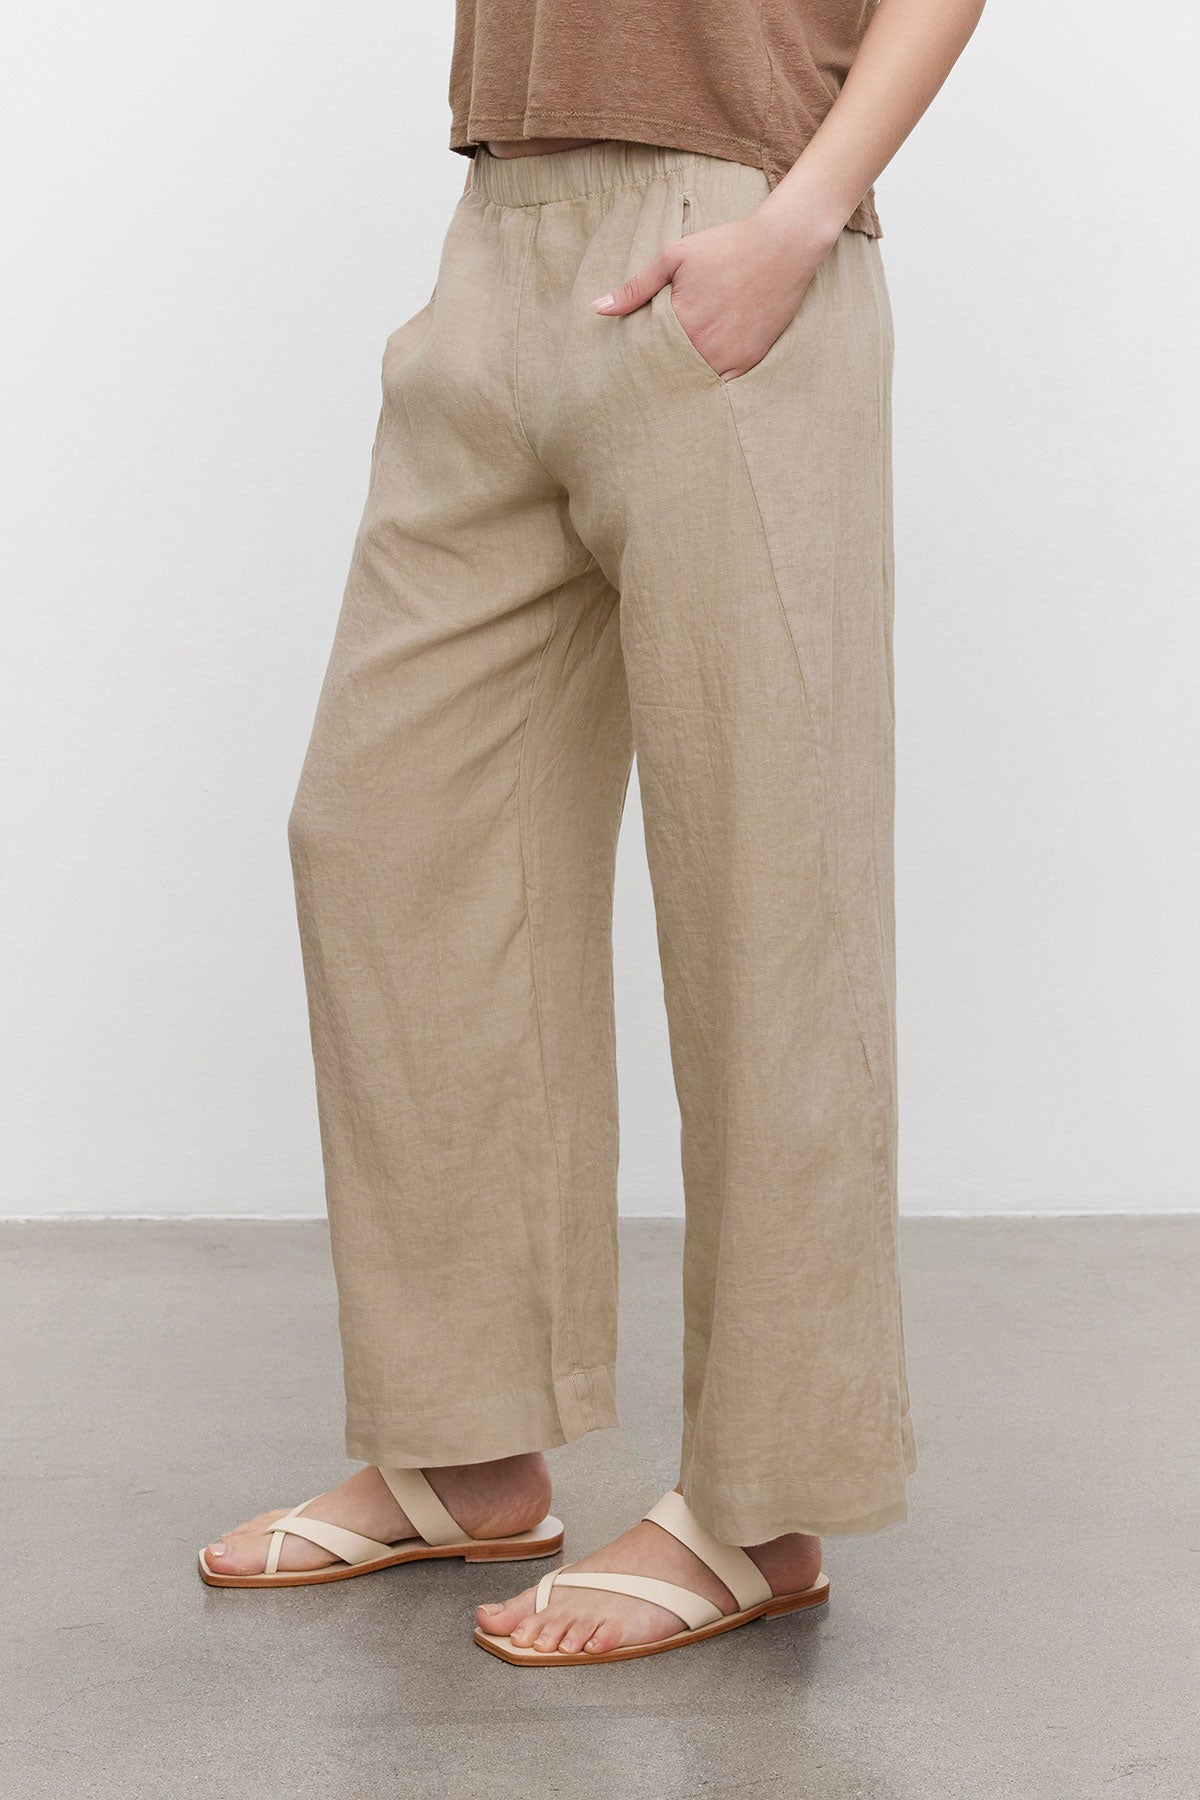 Person standing in a neutral pose wearing Velvet by Graham & Spencer's LOLA LINEN PANT and white sandals on a plain background.-36220935209153